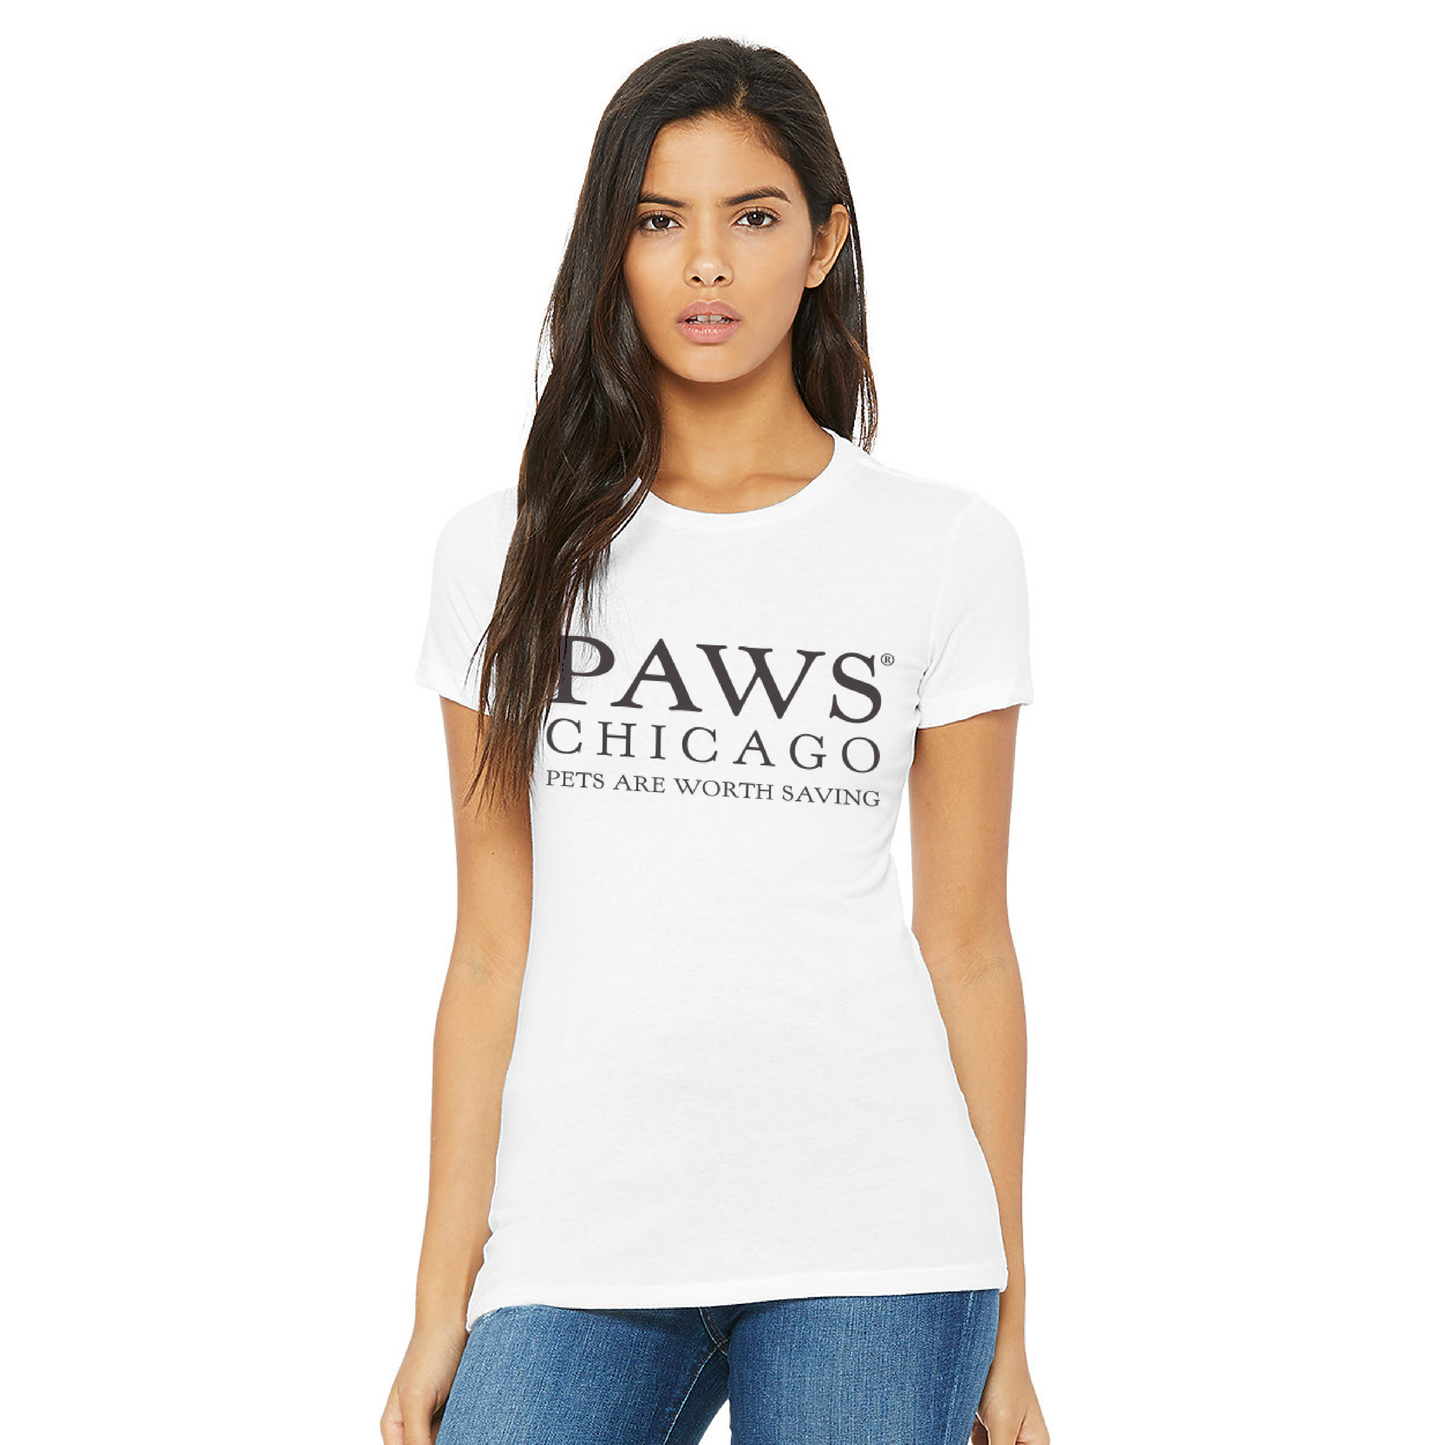 PAWS Women’s Fitted Short Sleeve T-Shirt